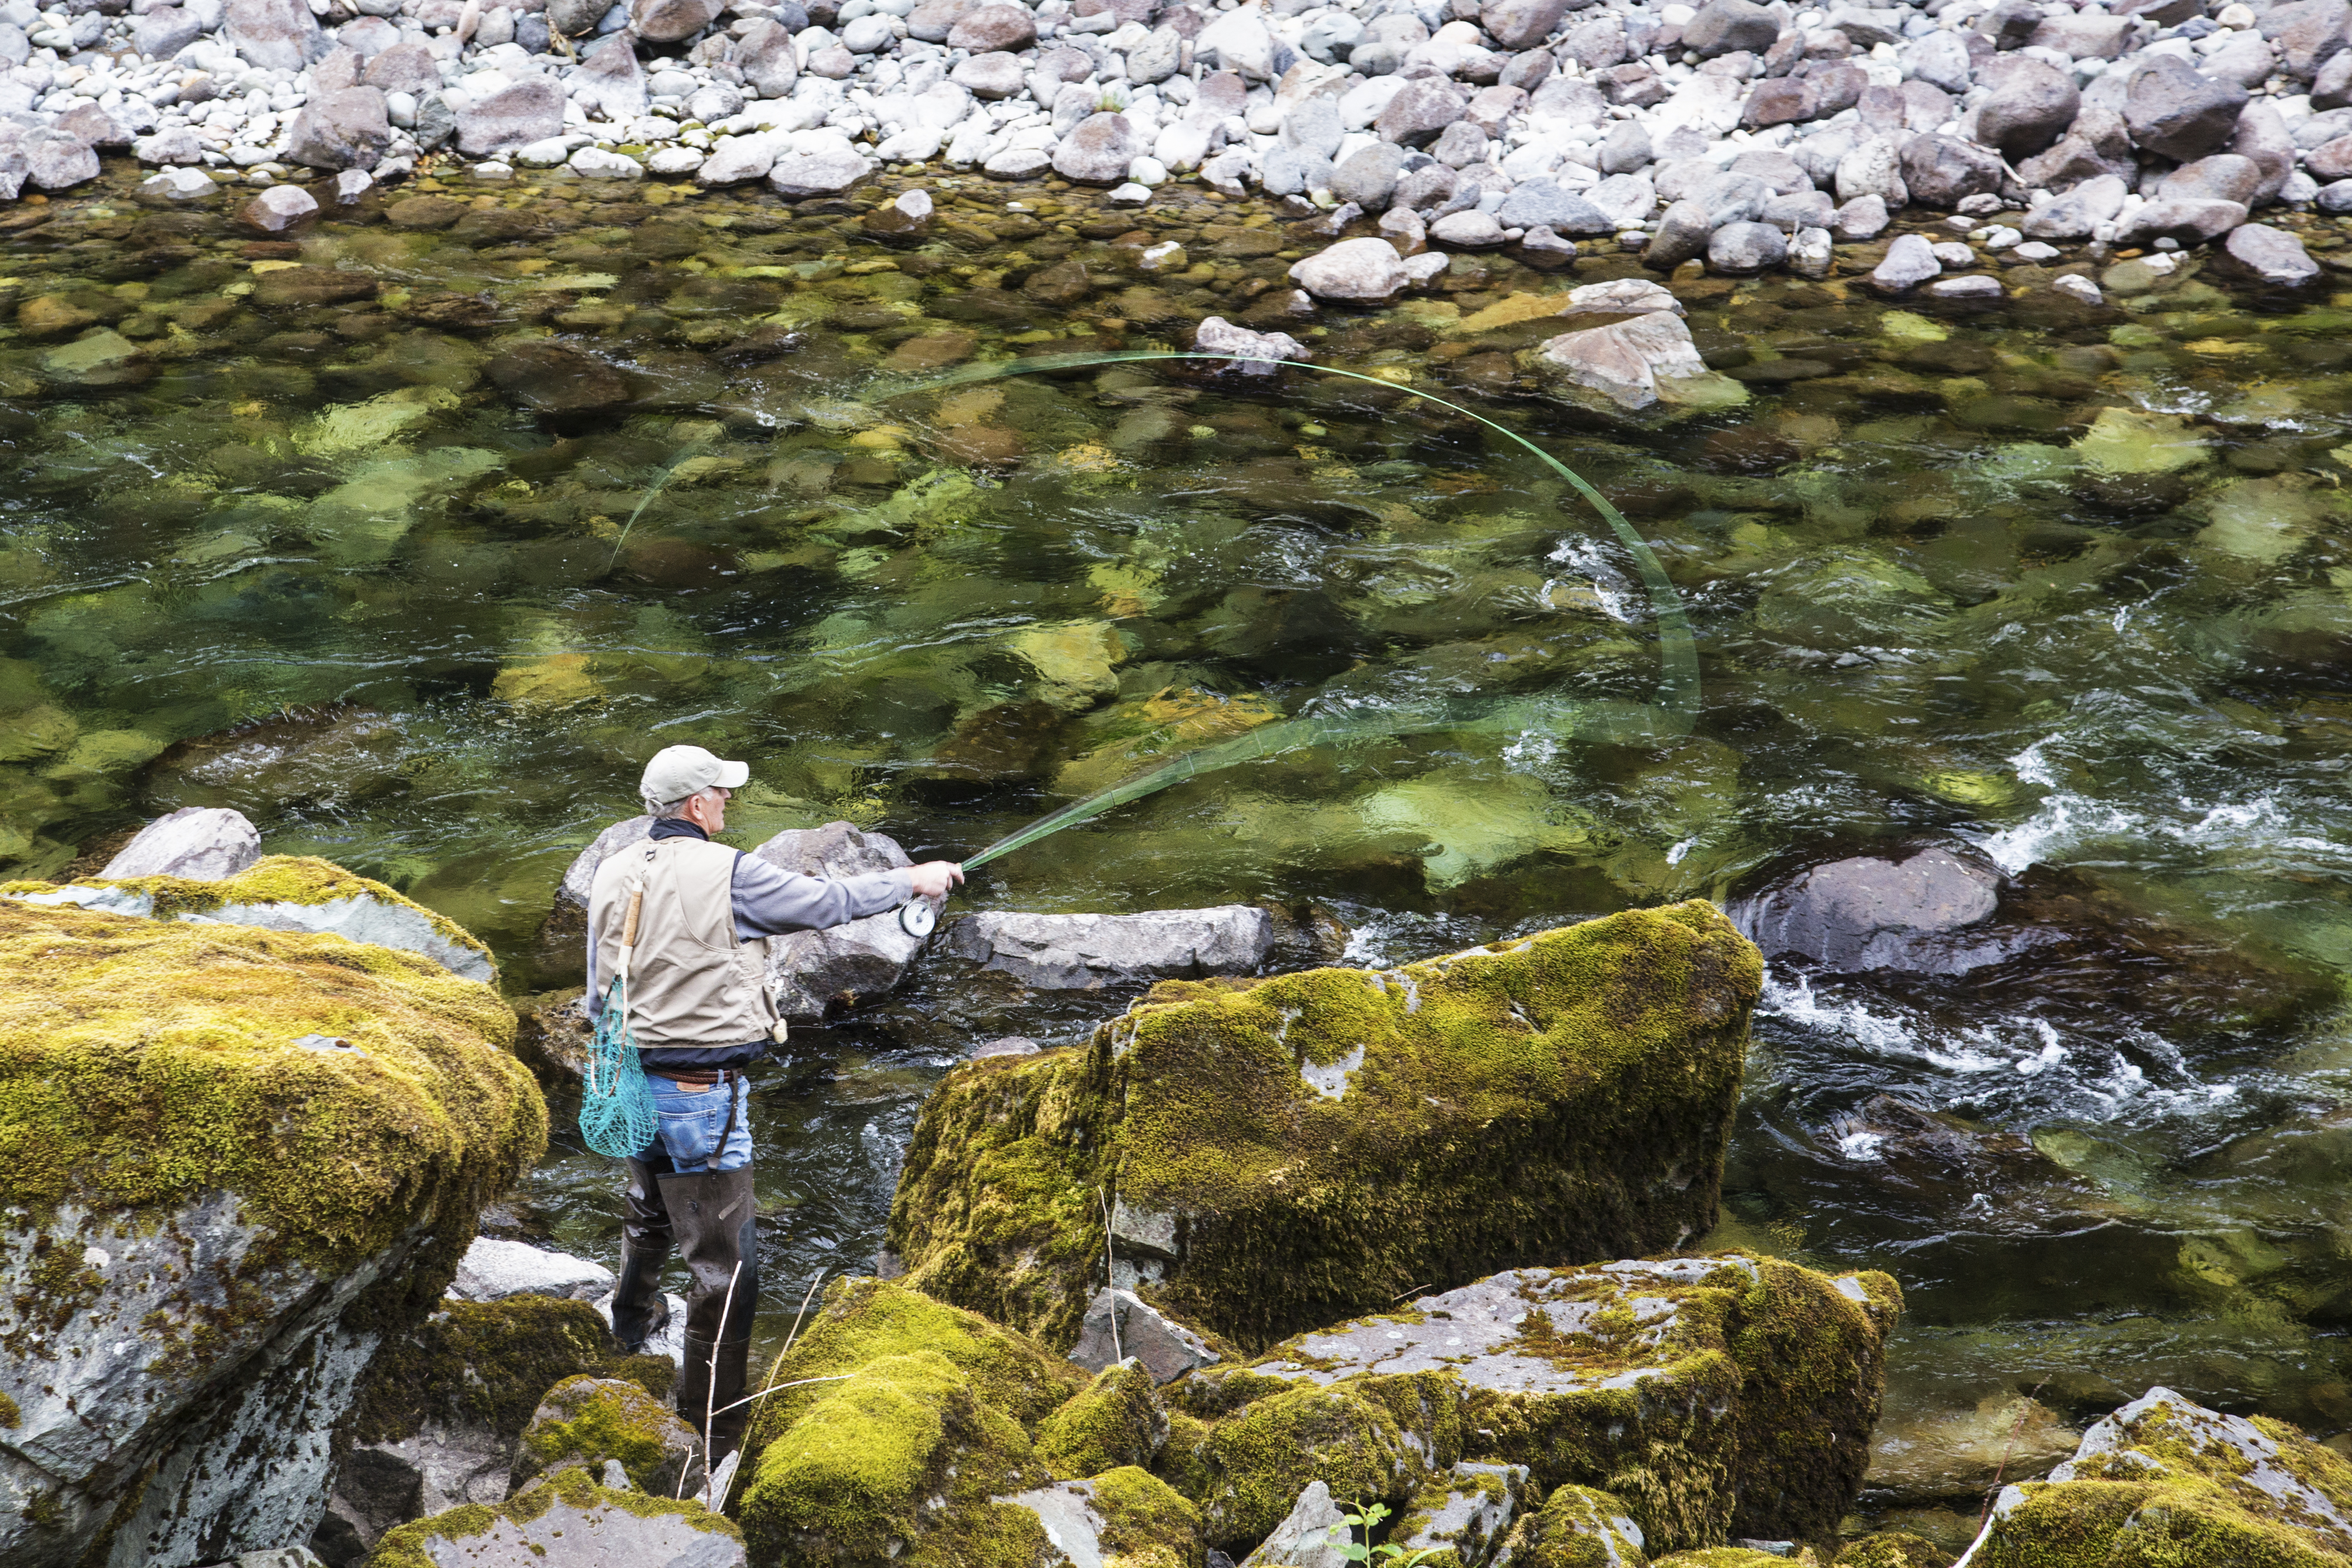 The Quartzville Creek Wild and Scenic River in Oregon is one of thousands of serene fishing destinations accessible on the National Rivers Project website. Photo by Bob Wick, Bureau of Land Management (retired).